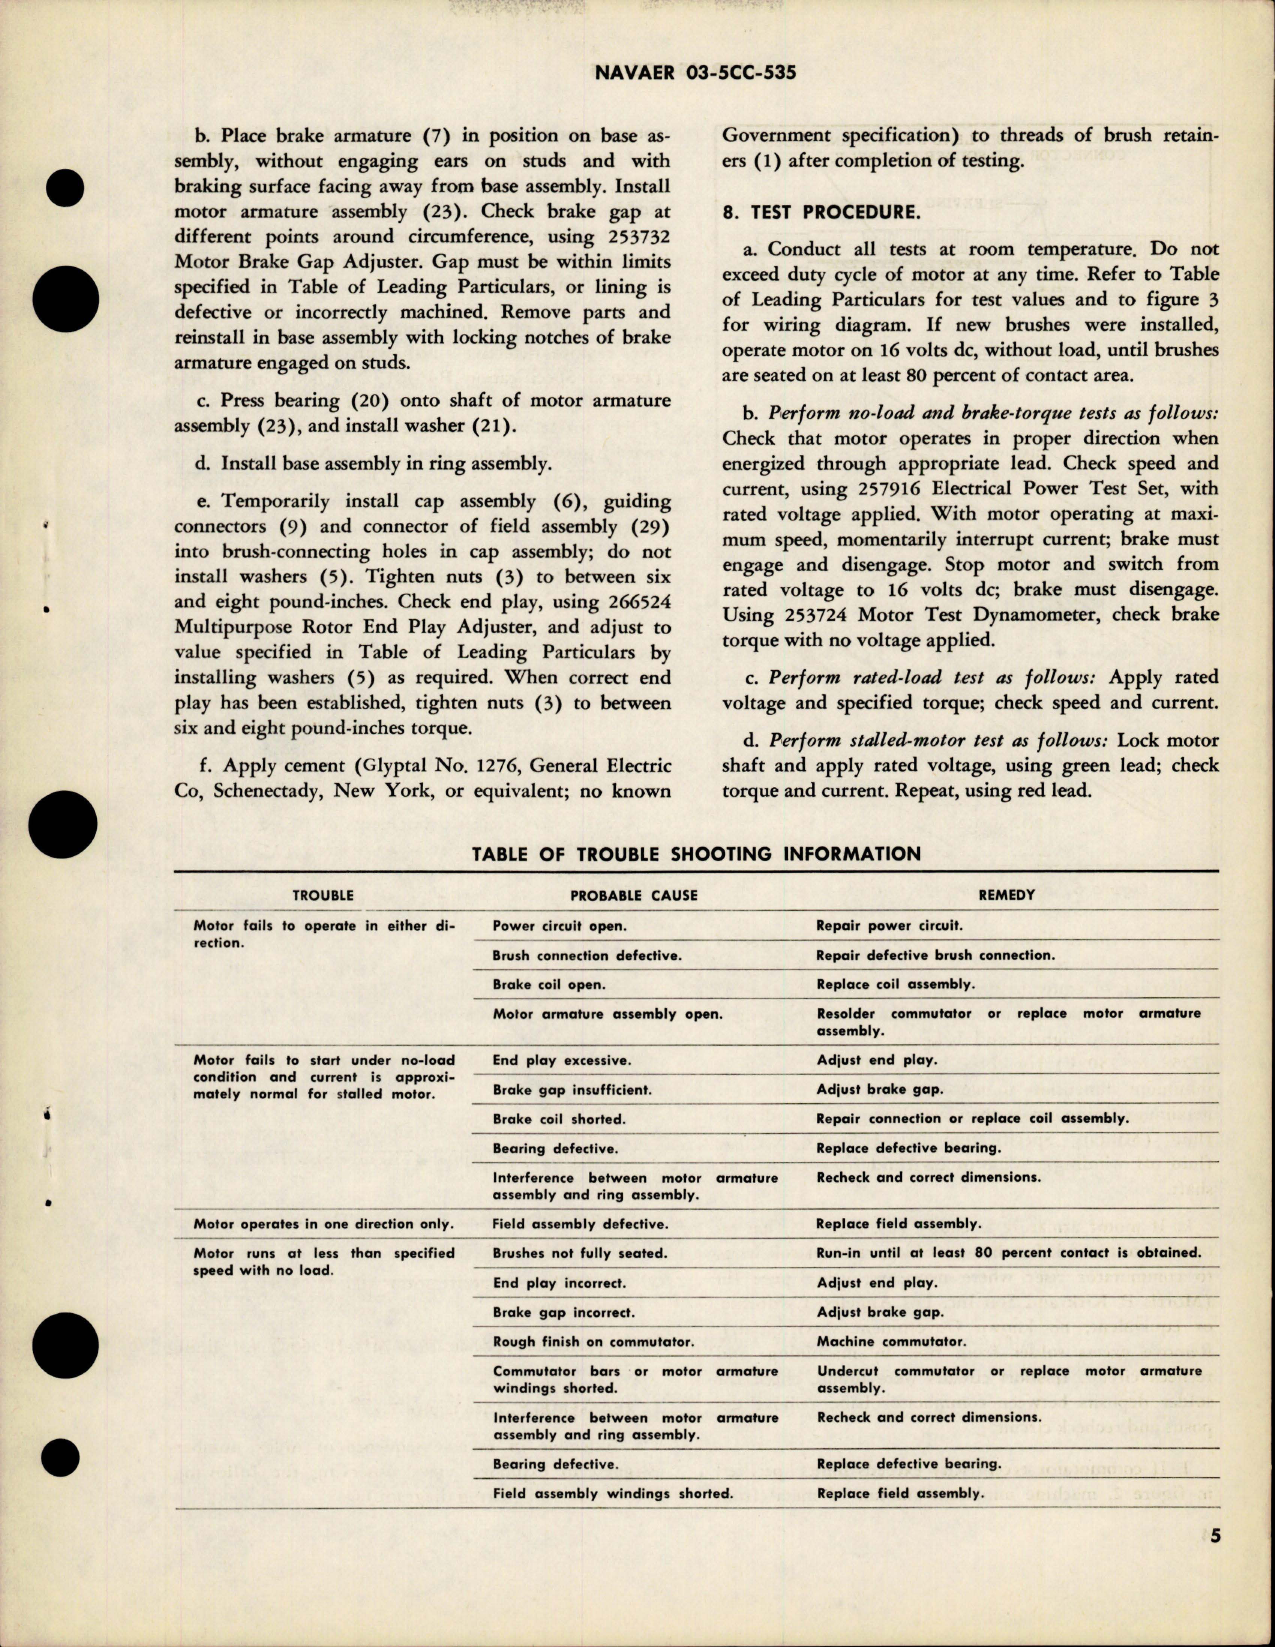 Sample page 5 from AirCorps Library document: Overhaul Instructions with Parts Breakdown for Aircraft Direct Current Motors - Parts 32741 and 32741-1 - Model DCM15-245-1